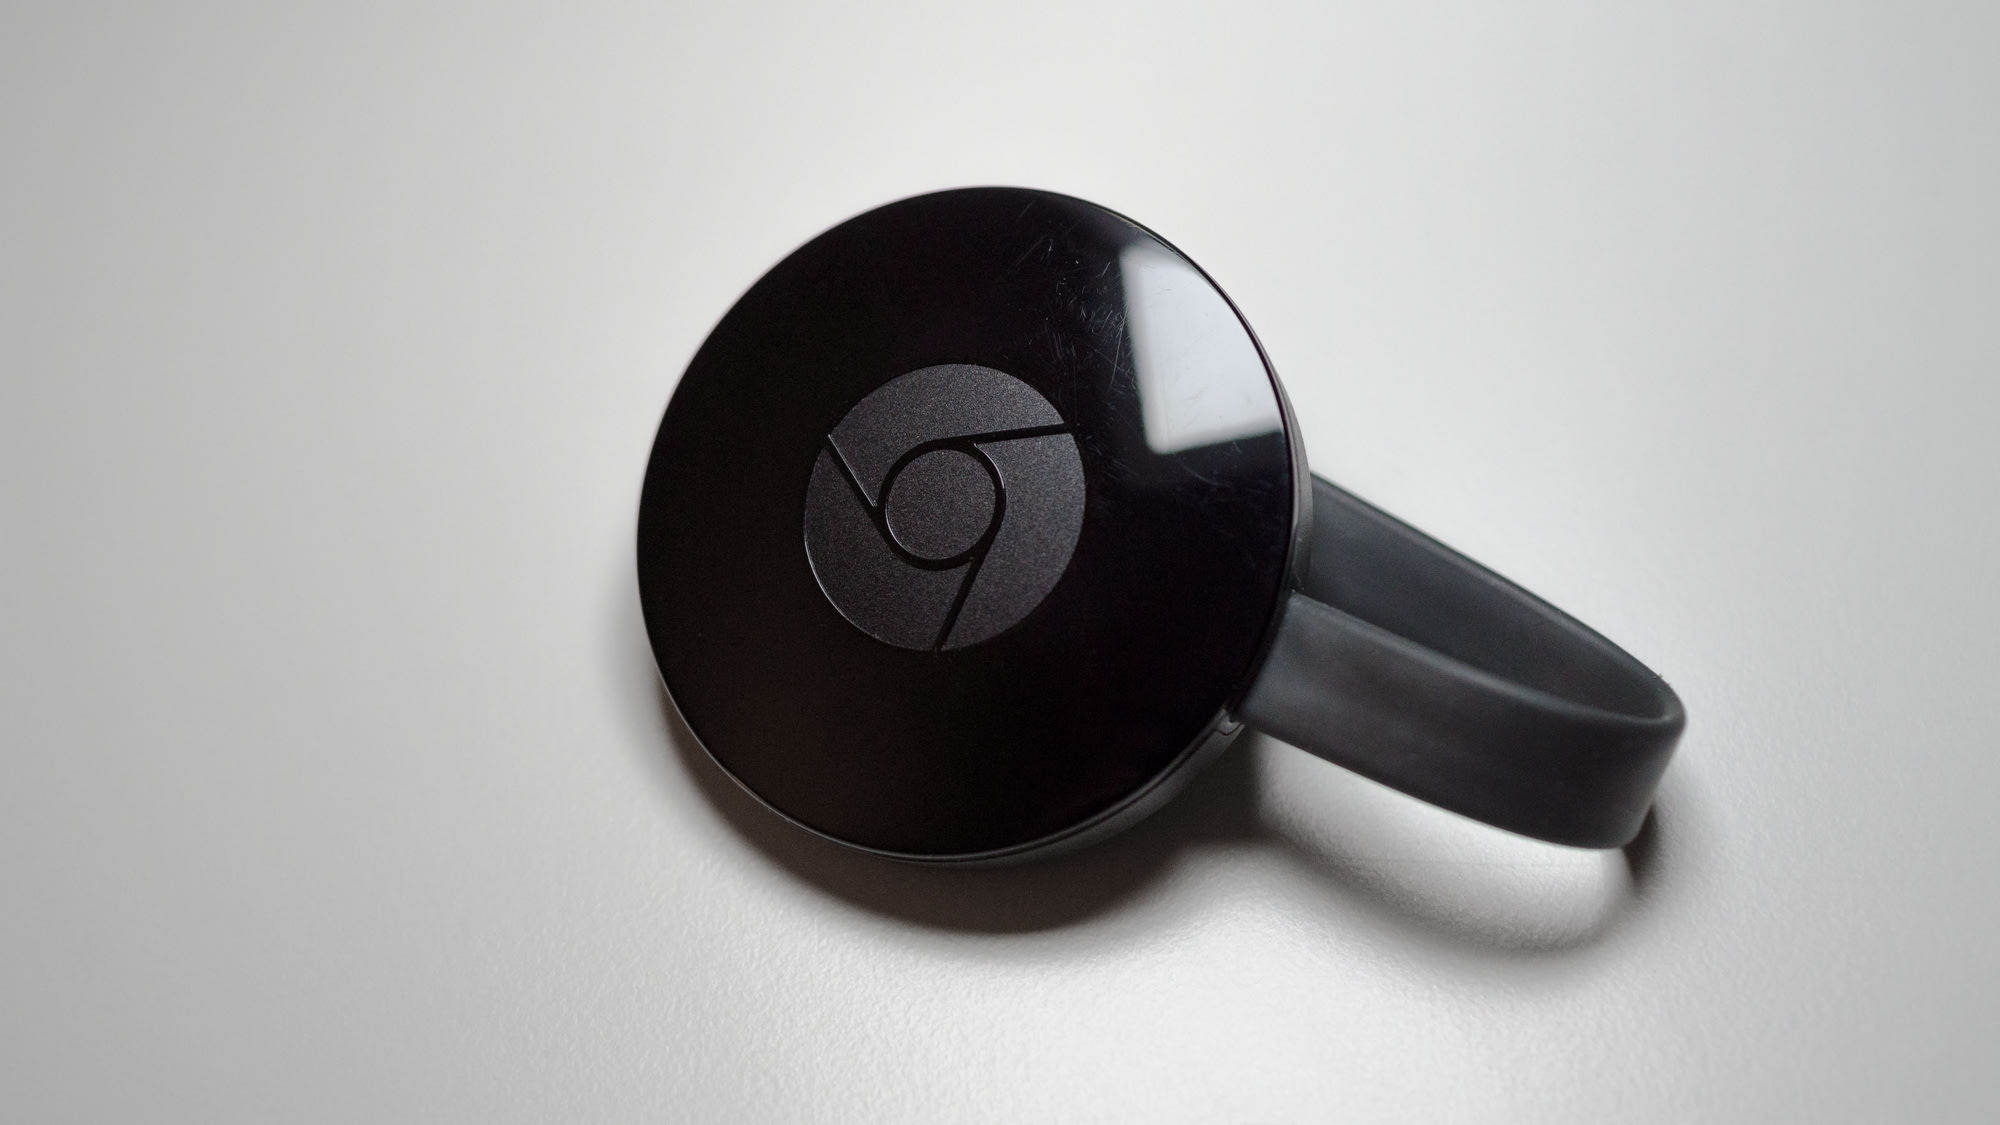 Google launches wired Ethernet adapter for Chromecast, promptly